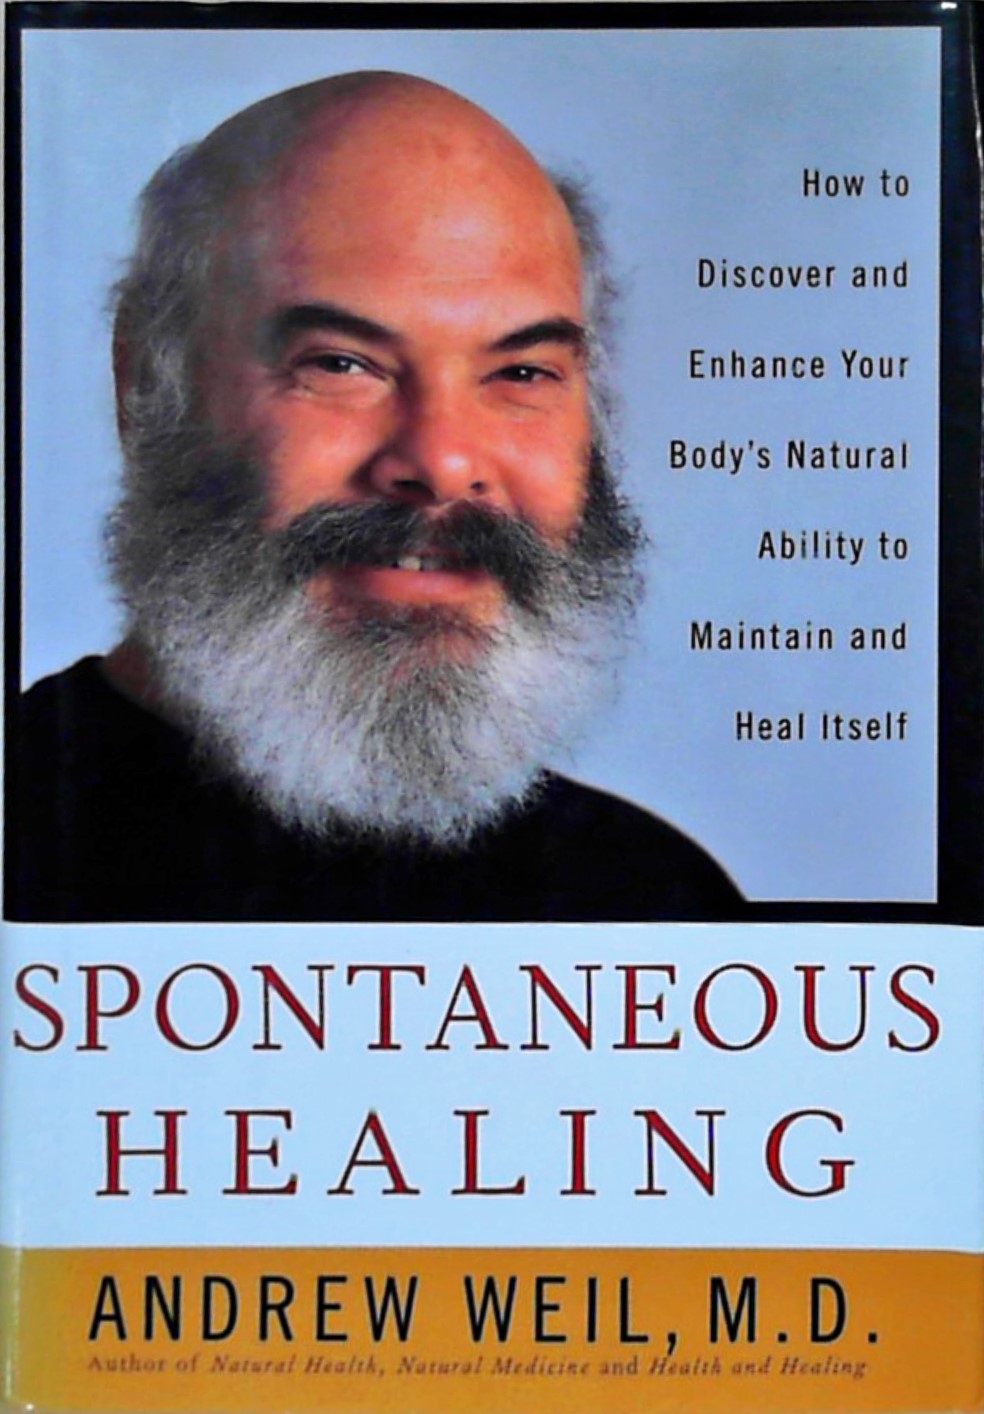 Spontaneous Healing: How to Discover and Enhance: Your Body's Natural Ability to Maintain and Heal Itself  Auflage: 1 - Weil, M.D. Andrew